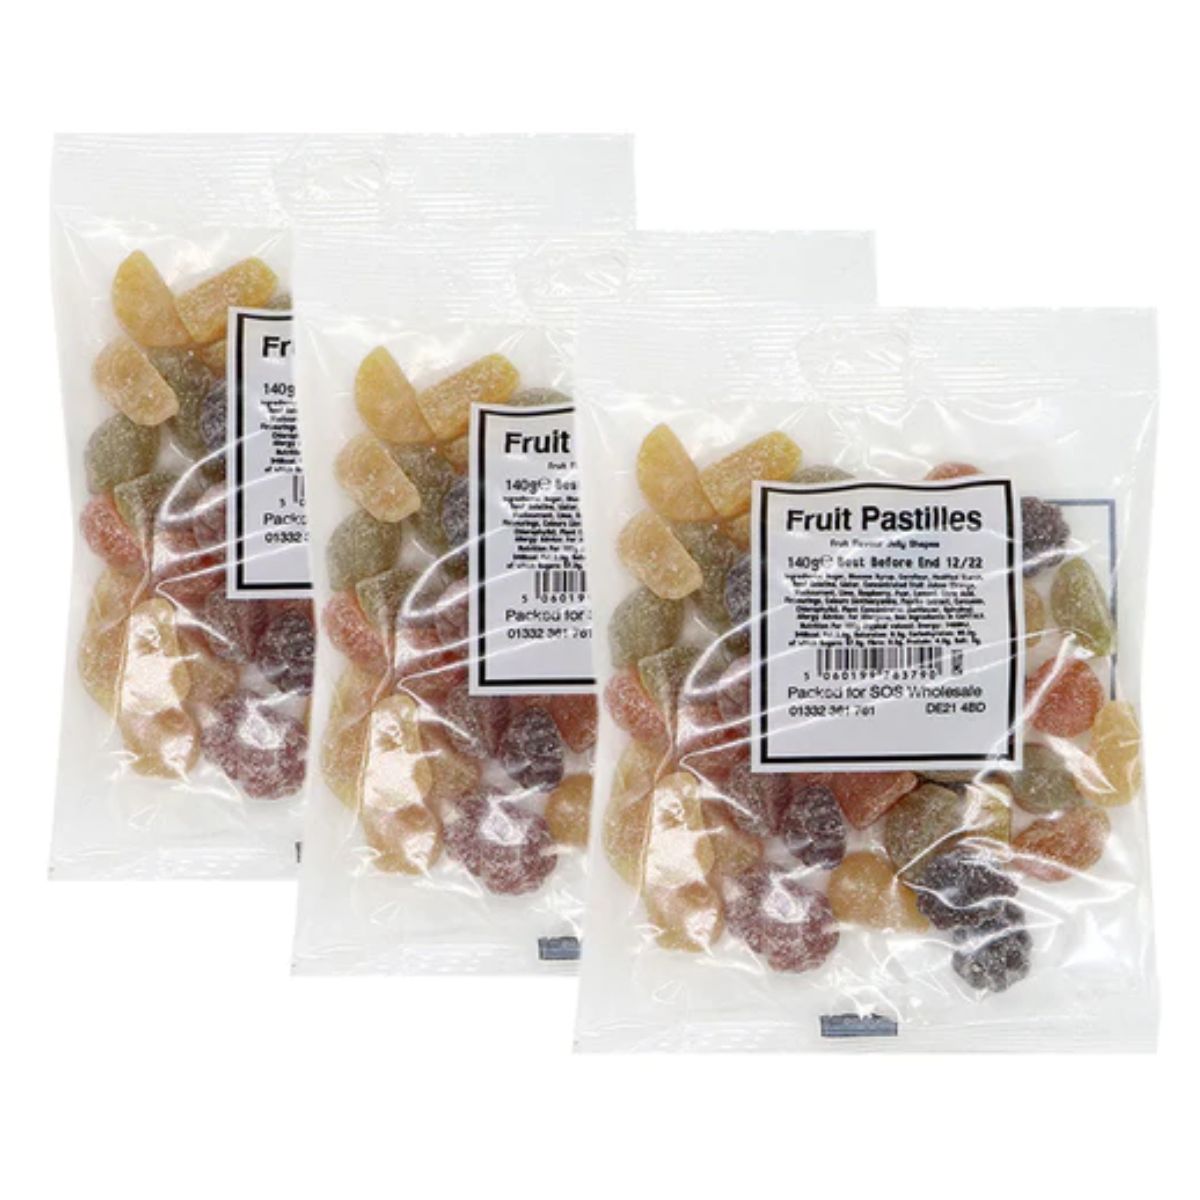 Three packages of Bumper - Bag Fruit Pastilles - 140g (1pcs) on a white background.